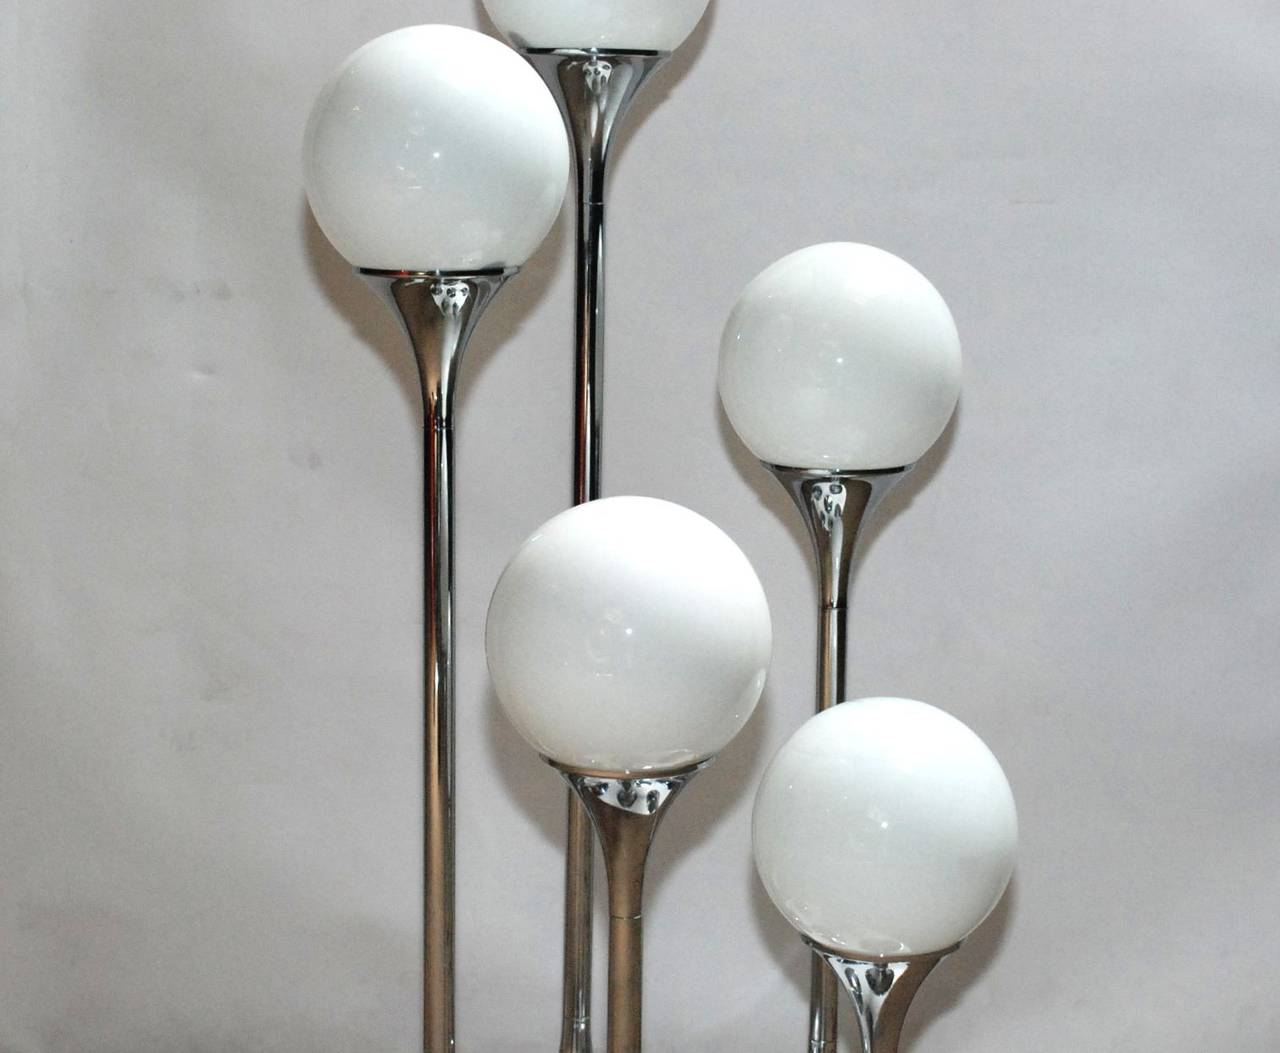 A five-light floor lamp by Sergio Mazza. Can also be hung from the ceiling.